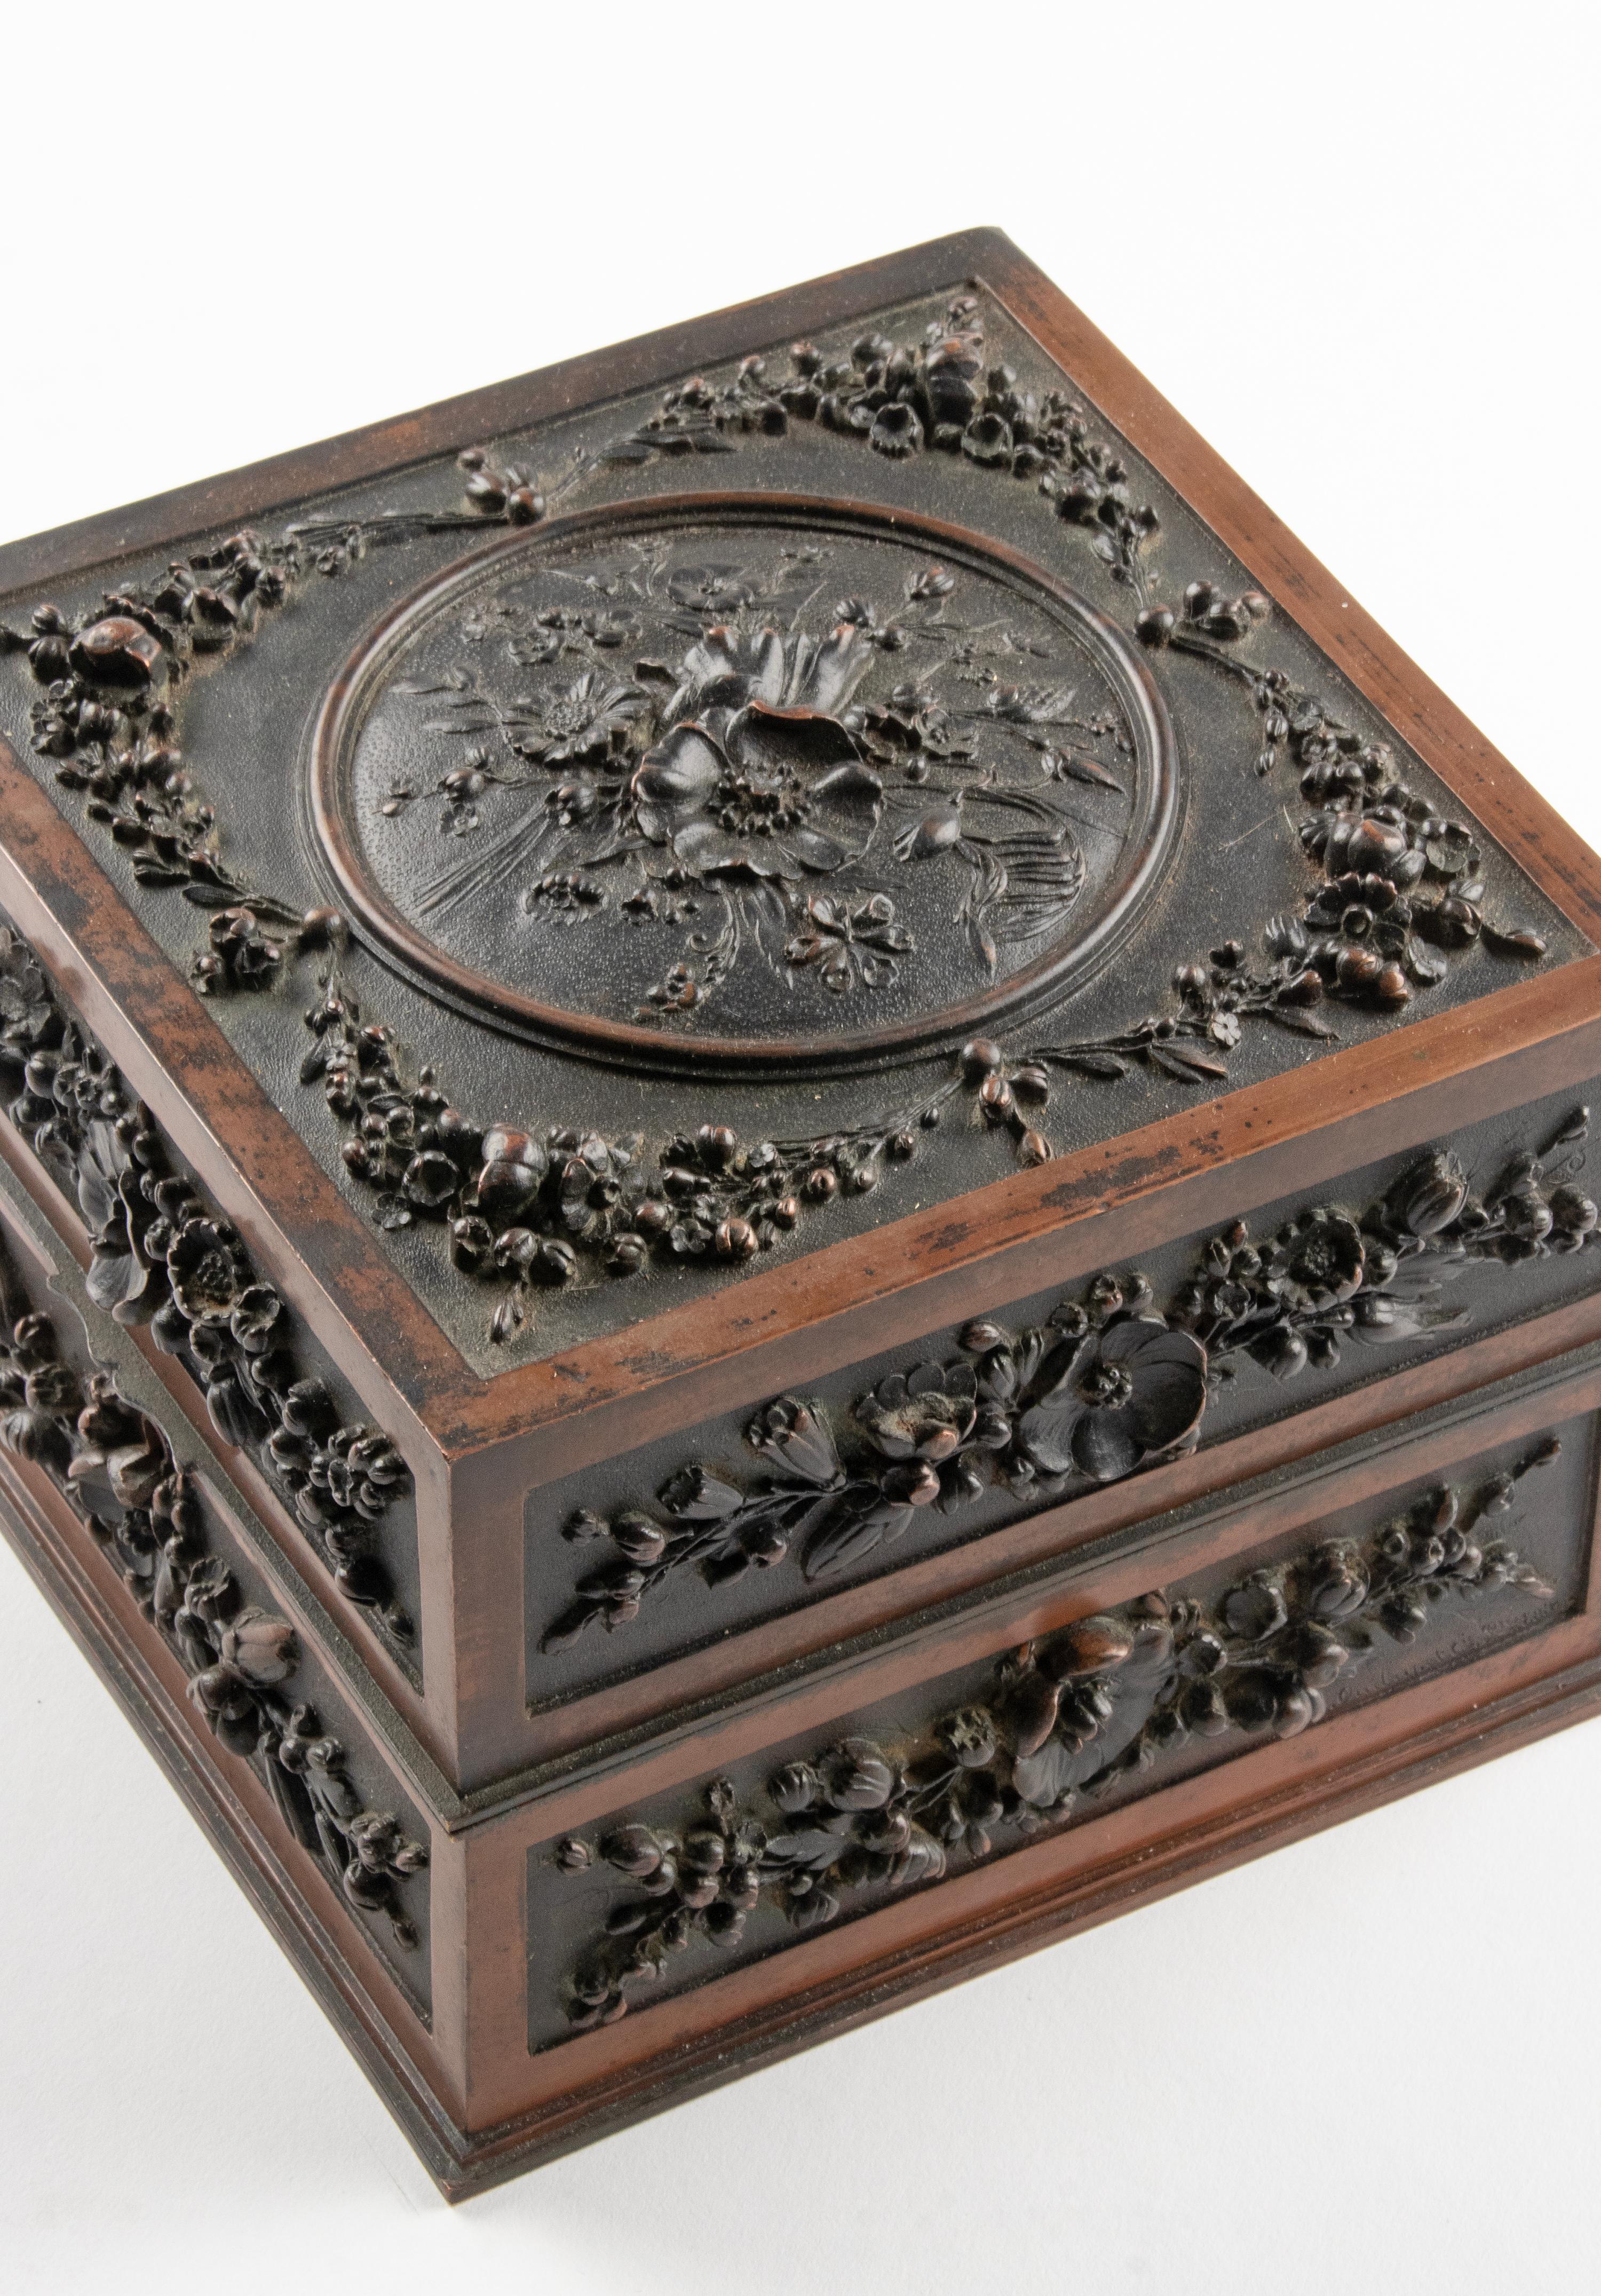 Late 19th Century Black Forest Bronze Decorative Box by Leopold Oudry & Cie. For Sale 10